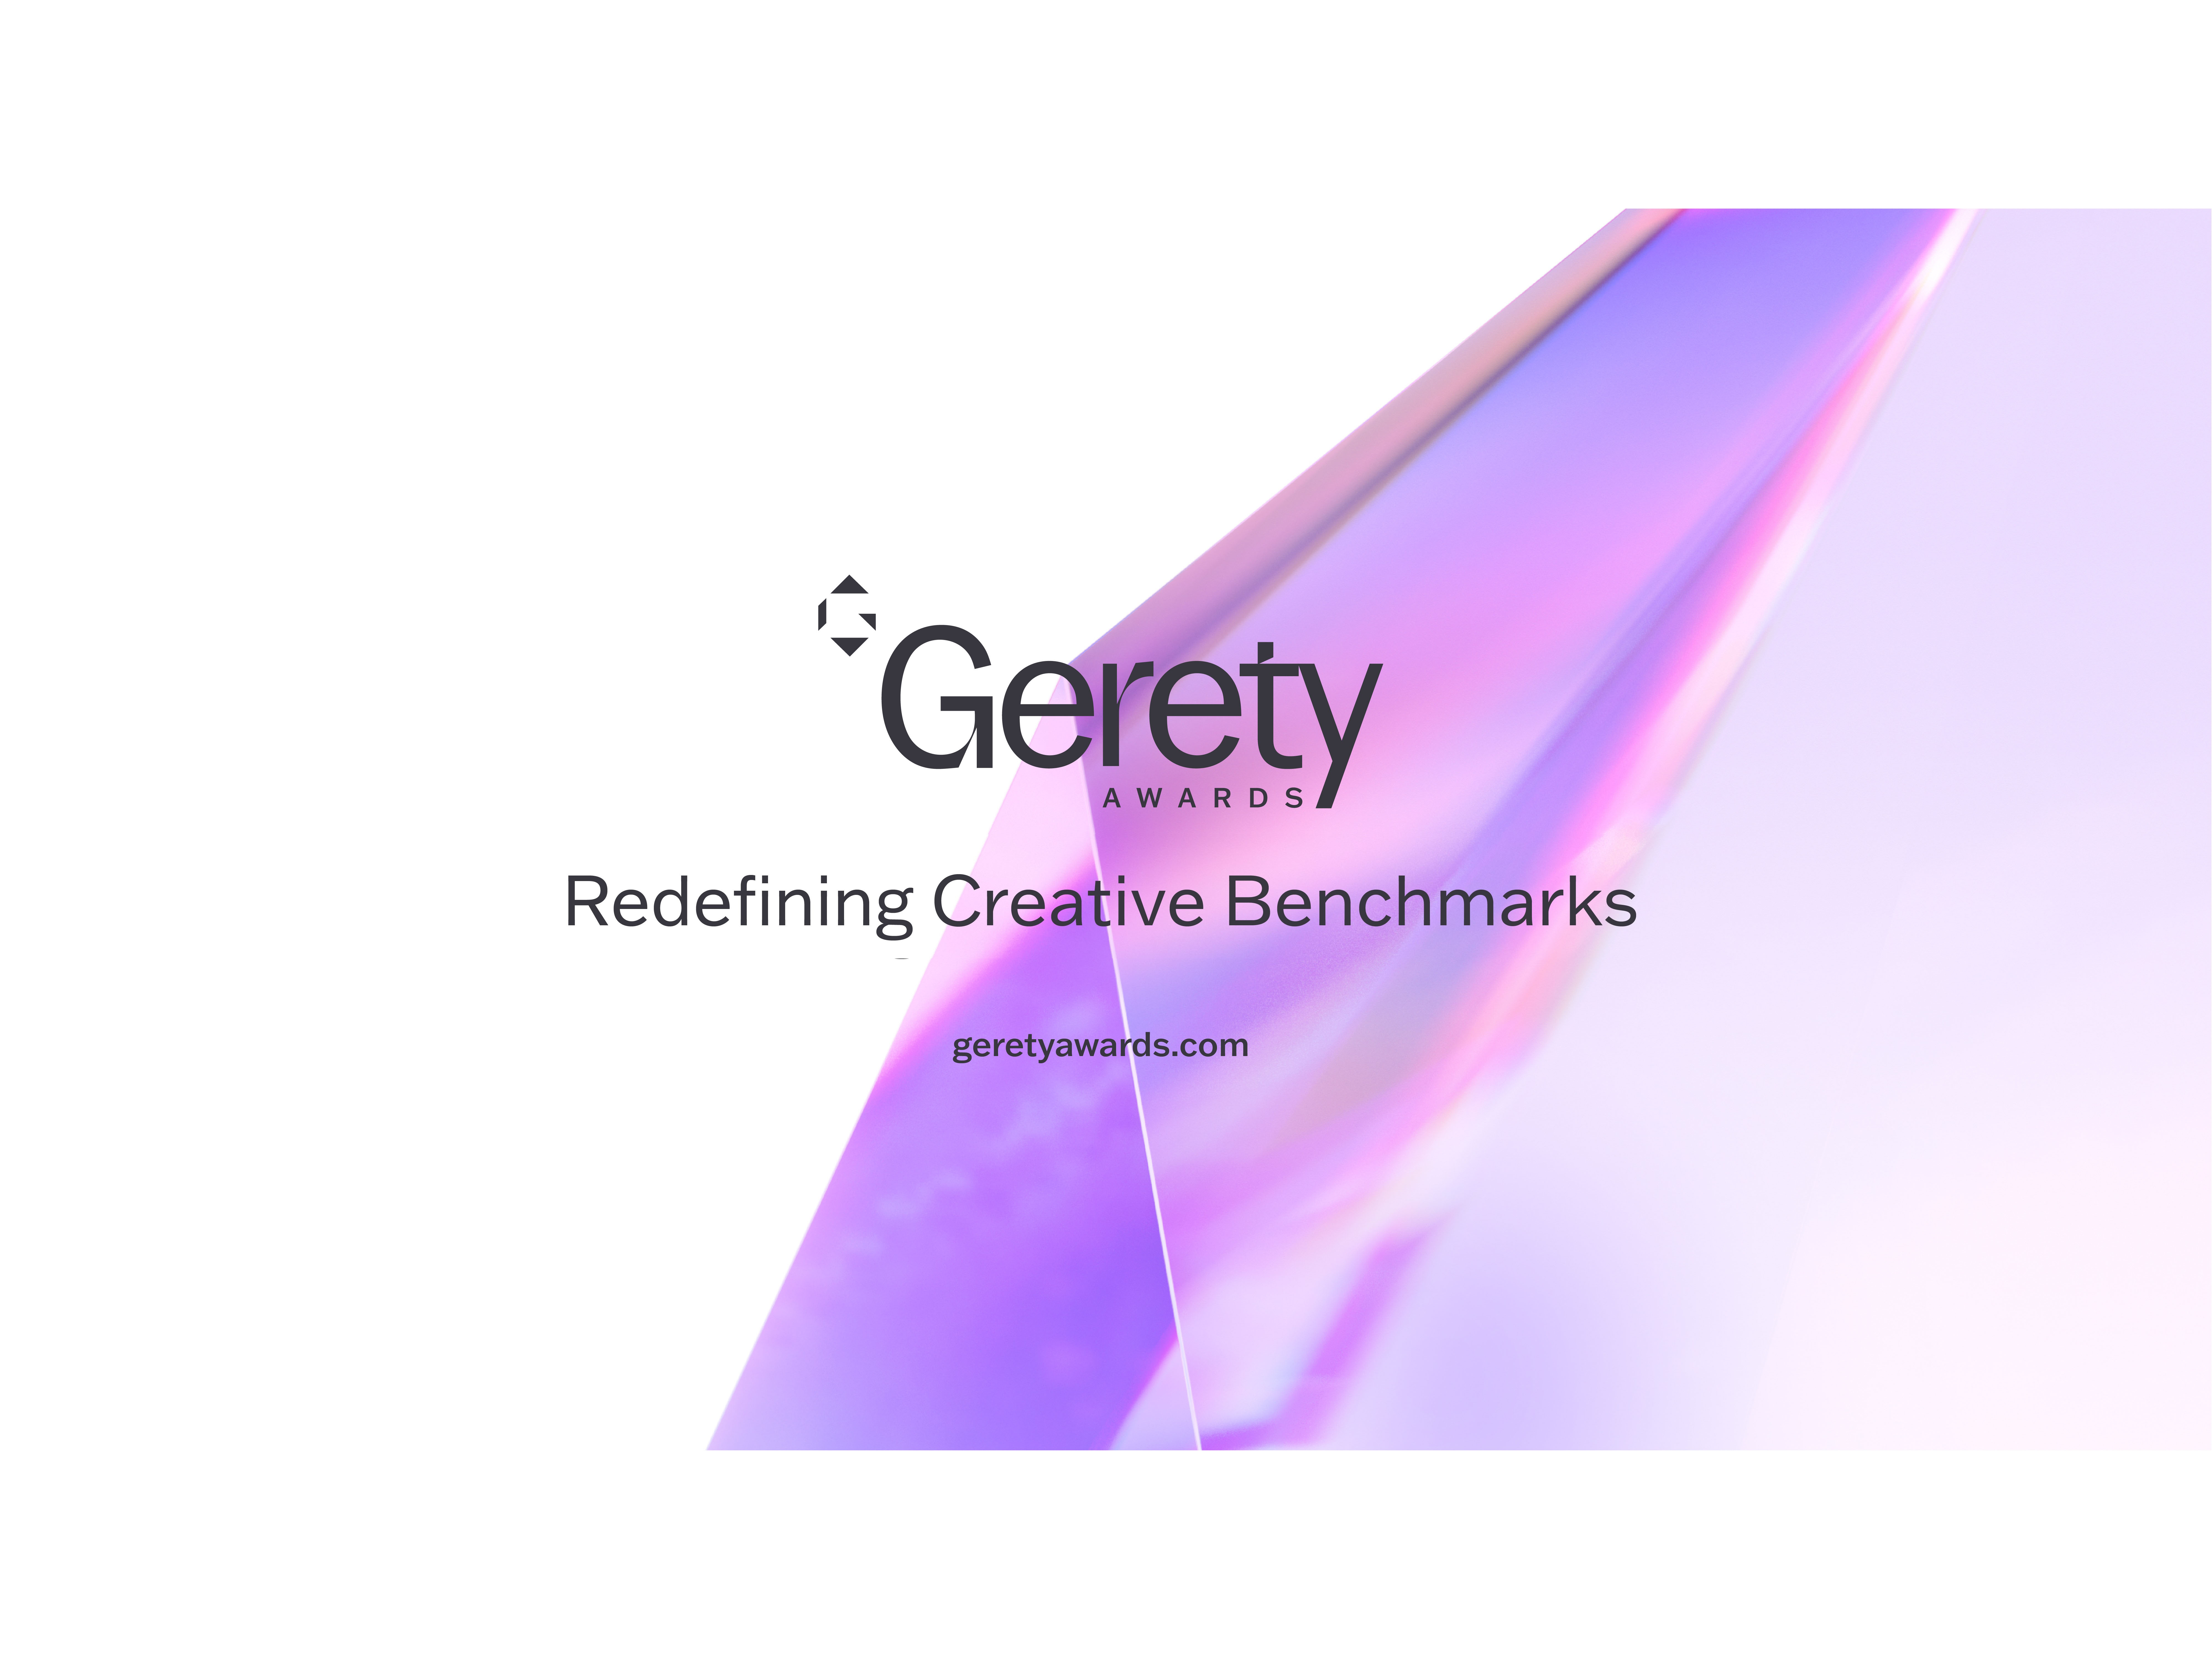 Gerety Awards’ final deadline for entries ends May 13